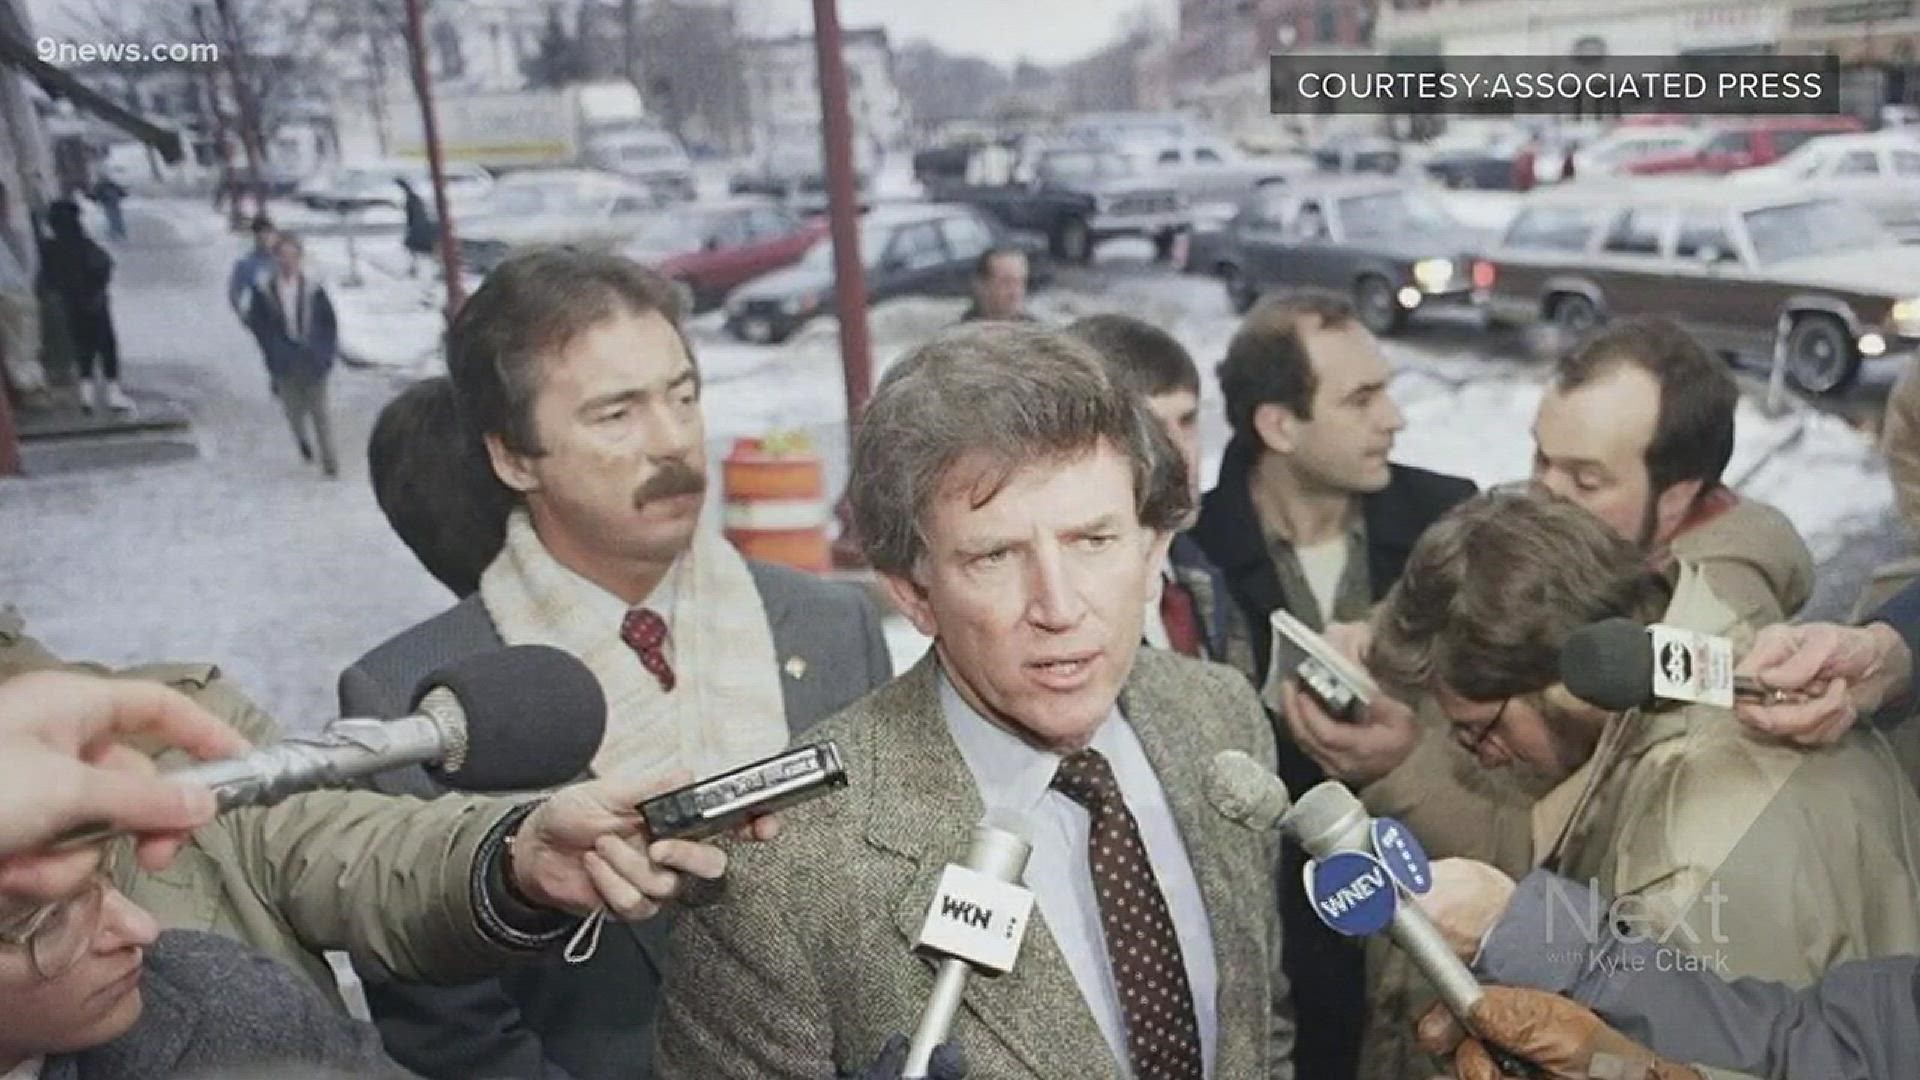 The closest a Coloradan has got to winning the White House was Gary Hart. Here's a Friday Flashback to 1987 when Hart and Pat Schroeder were both in the running.